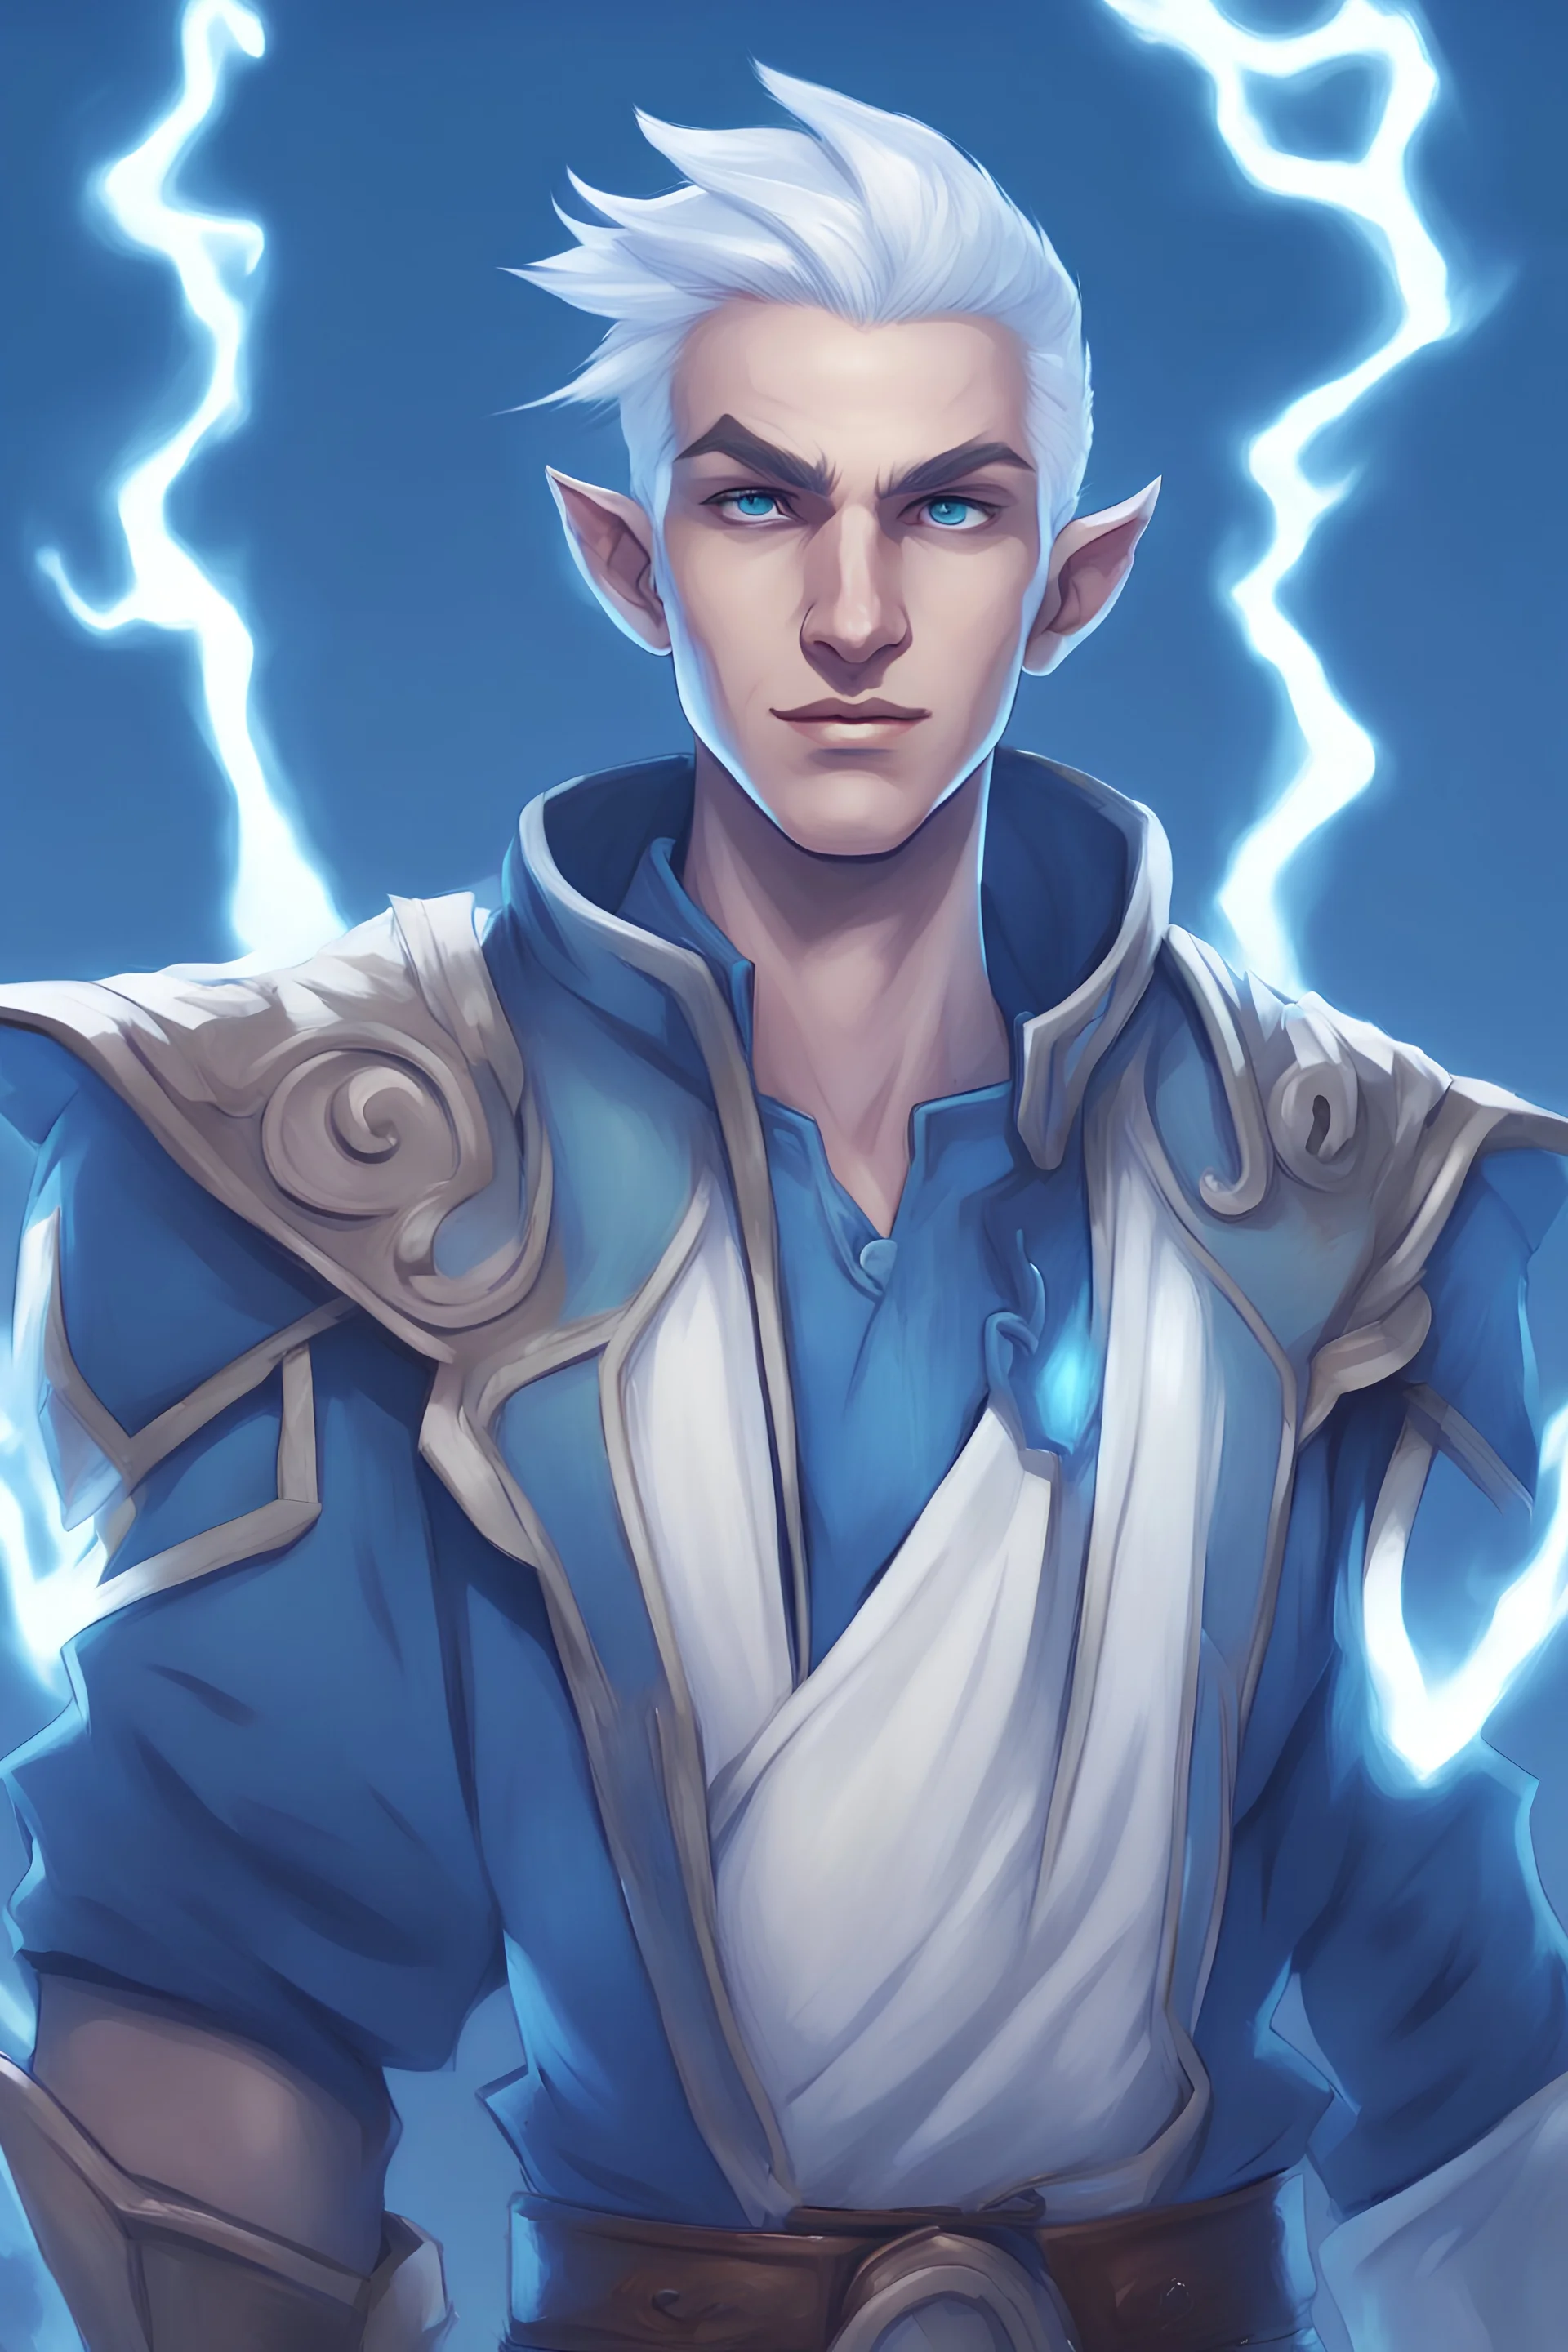 create a male air genasi from dungeons and dragons, blue lightning tattoos, pointed ears, slight smile, white short hair, undercut, light blue eyes, wind like hair, blue jacket, digital art, high resolution, fantasy, strong lighting